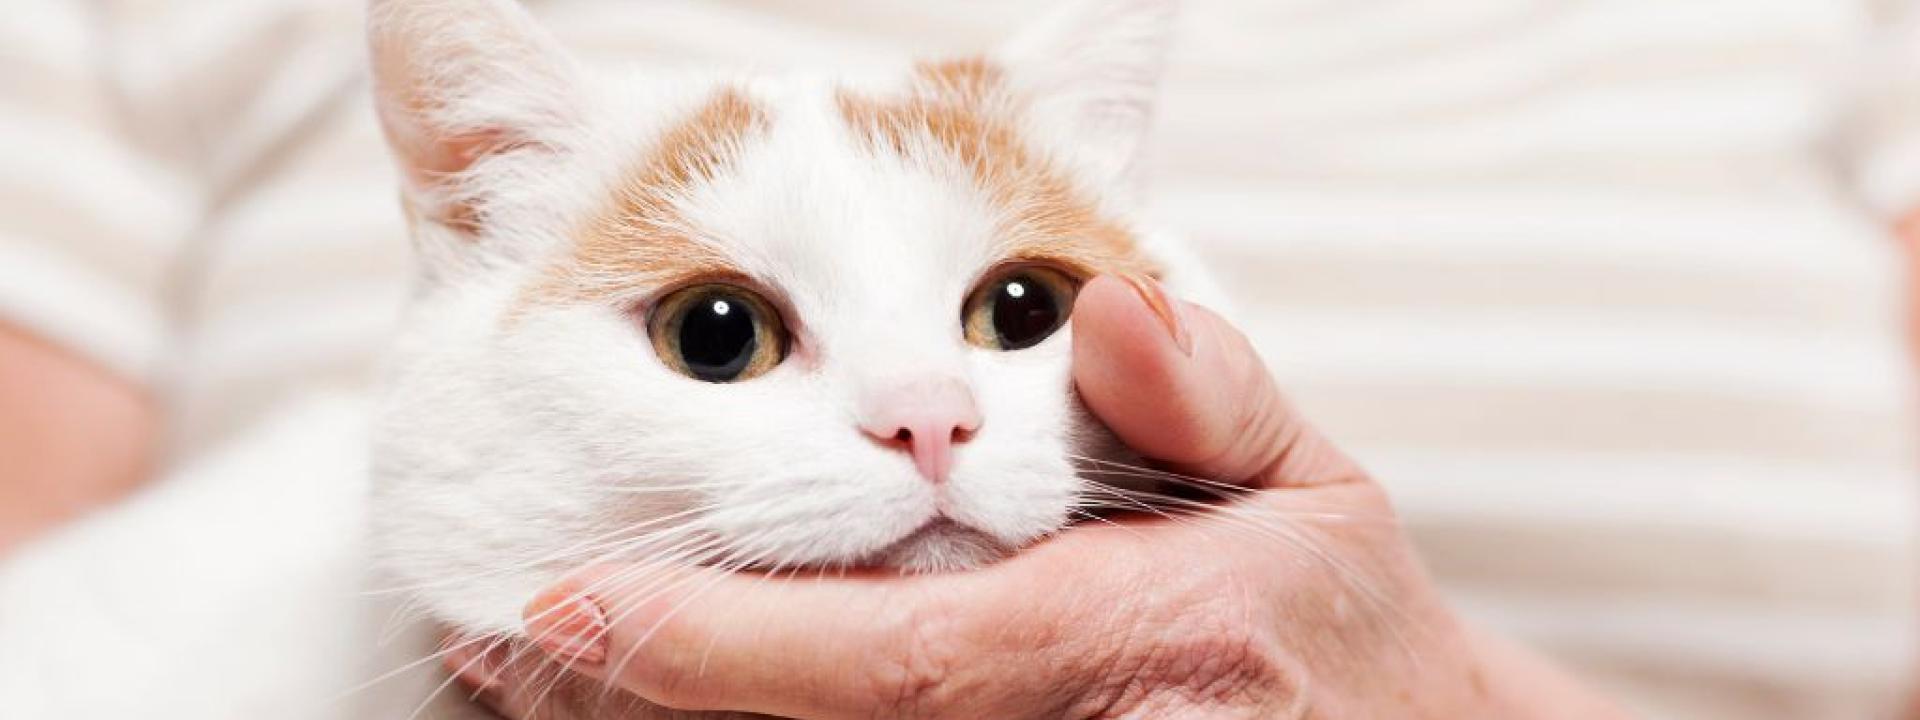 Owner holding cat's face.